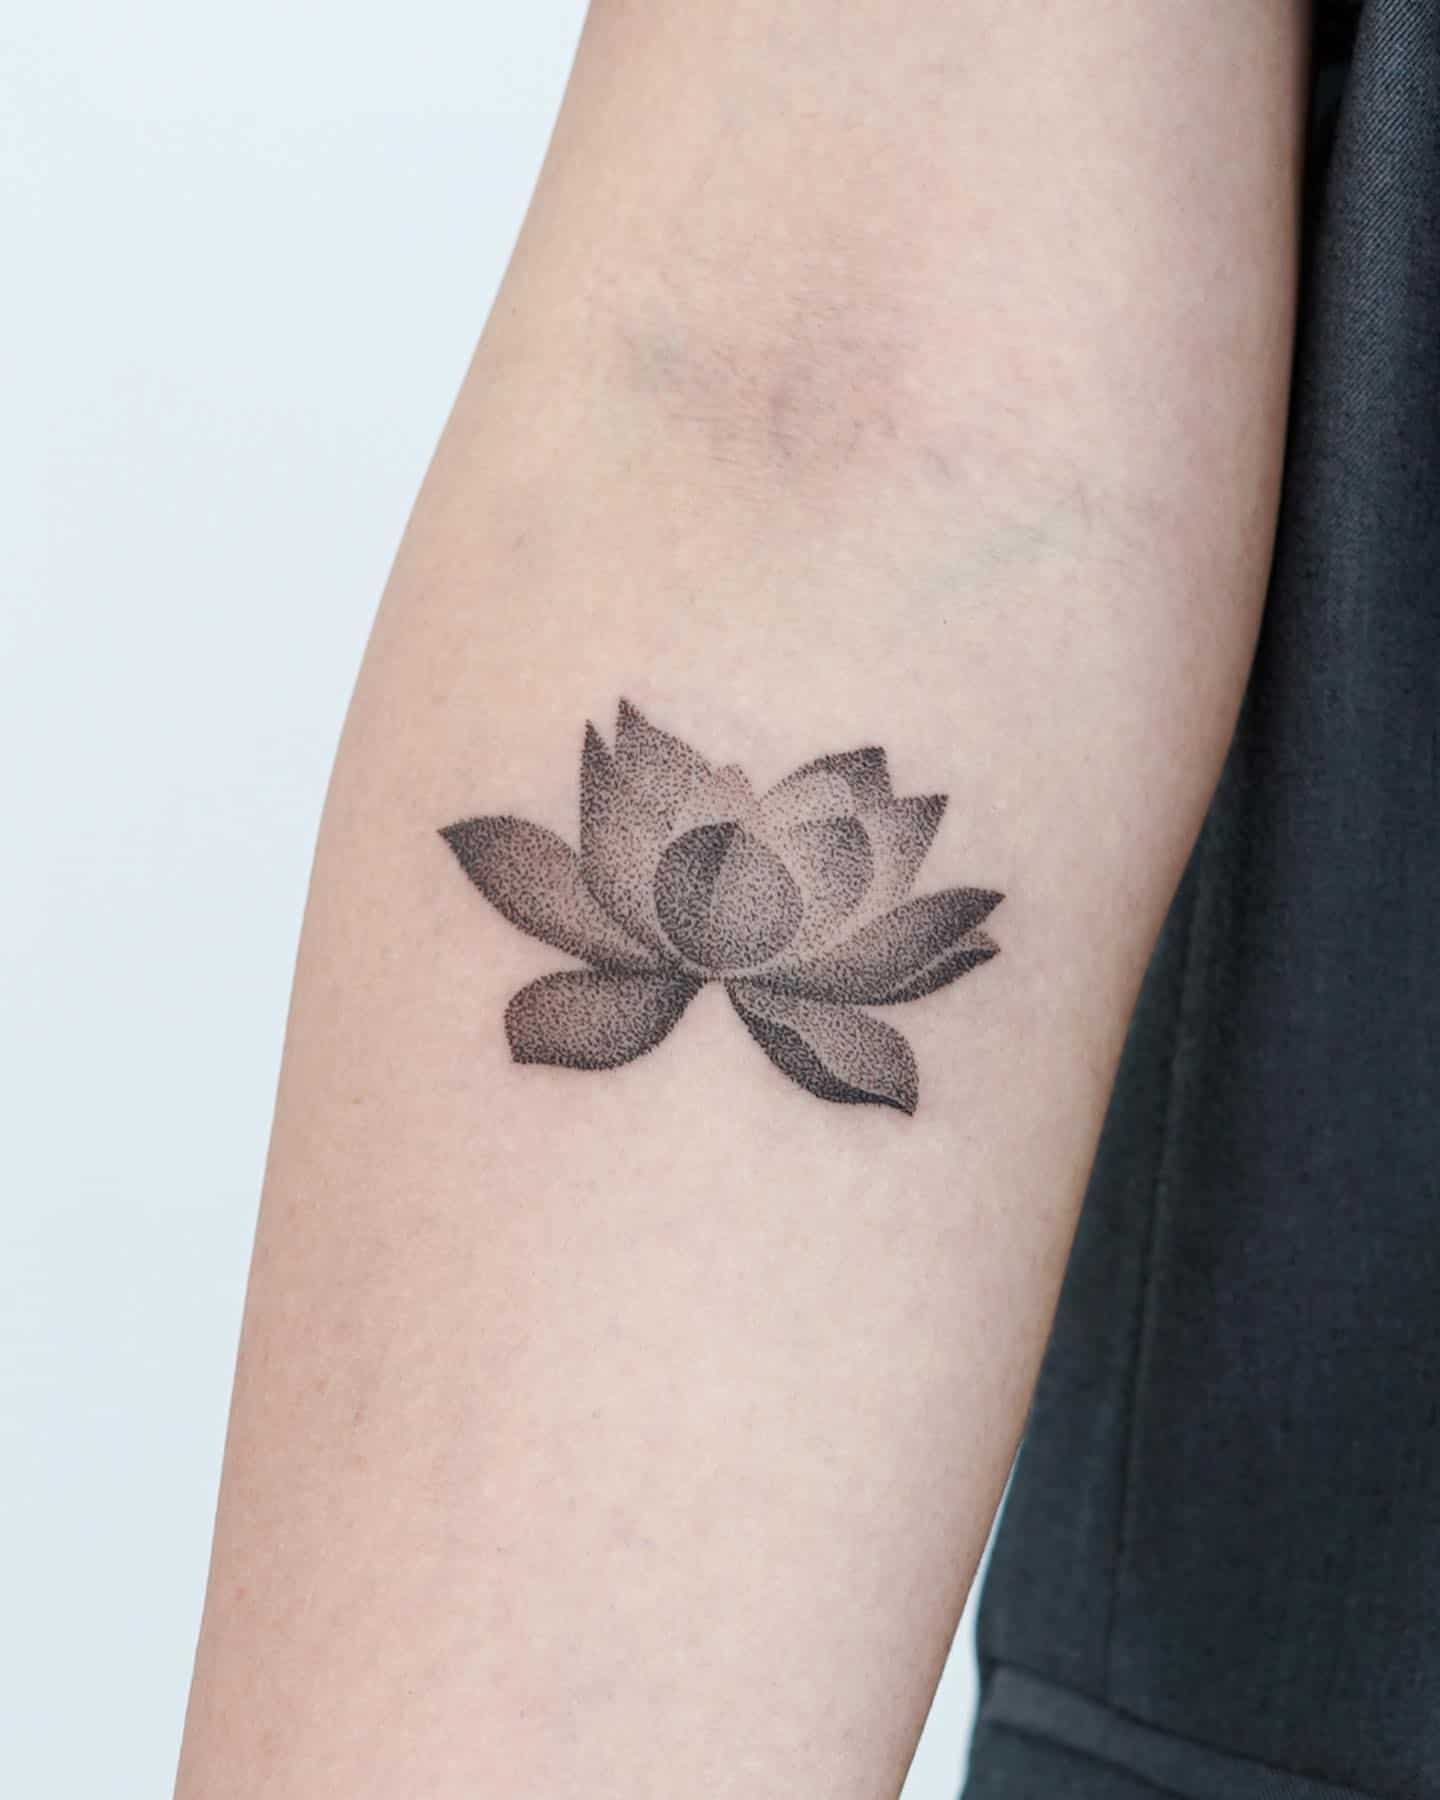 35 Awesome Lotus Flower Tattoo Ideas for Men & Women in 2023